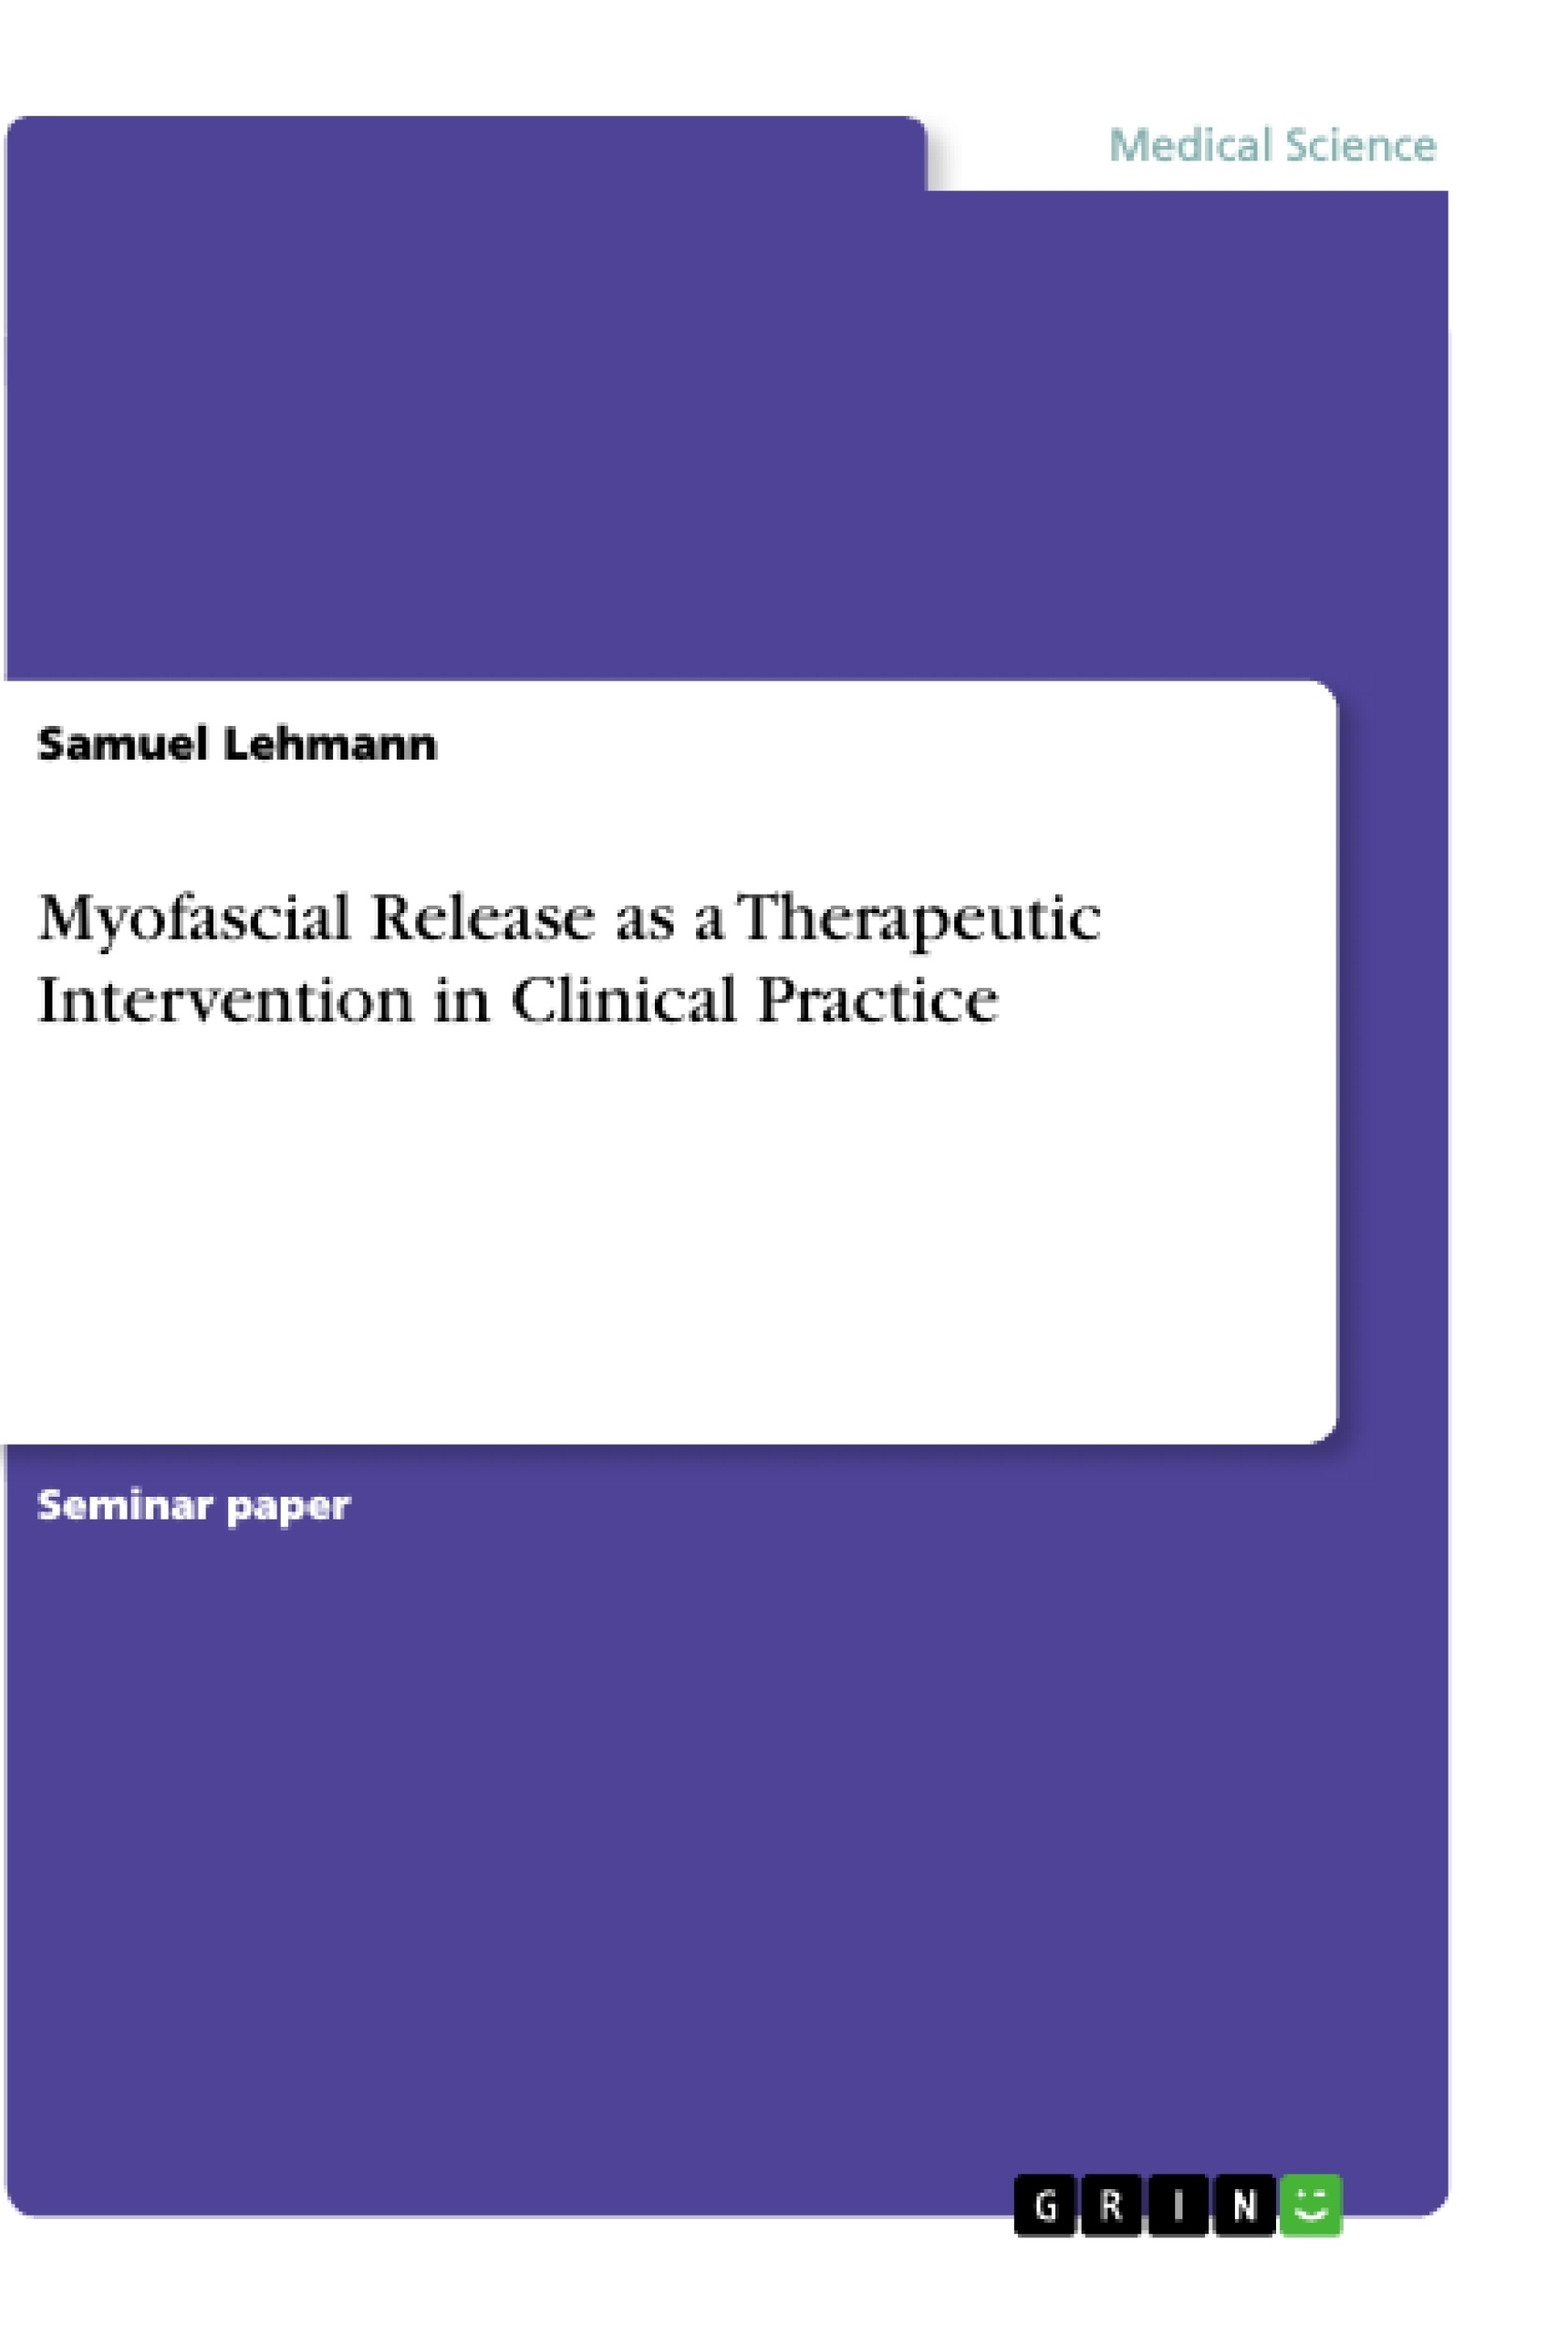 Title: Myofascial Release as a Therapeutic Intervention in Clinical Practice